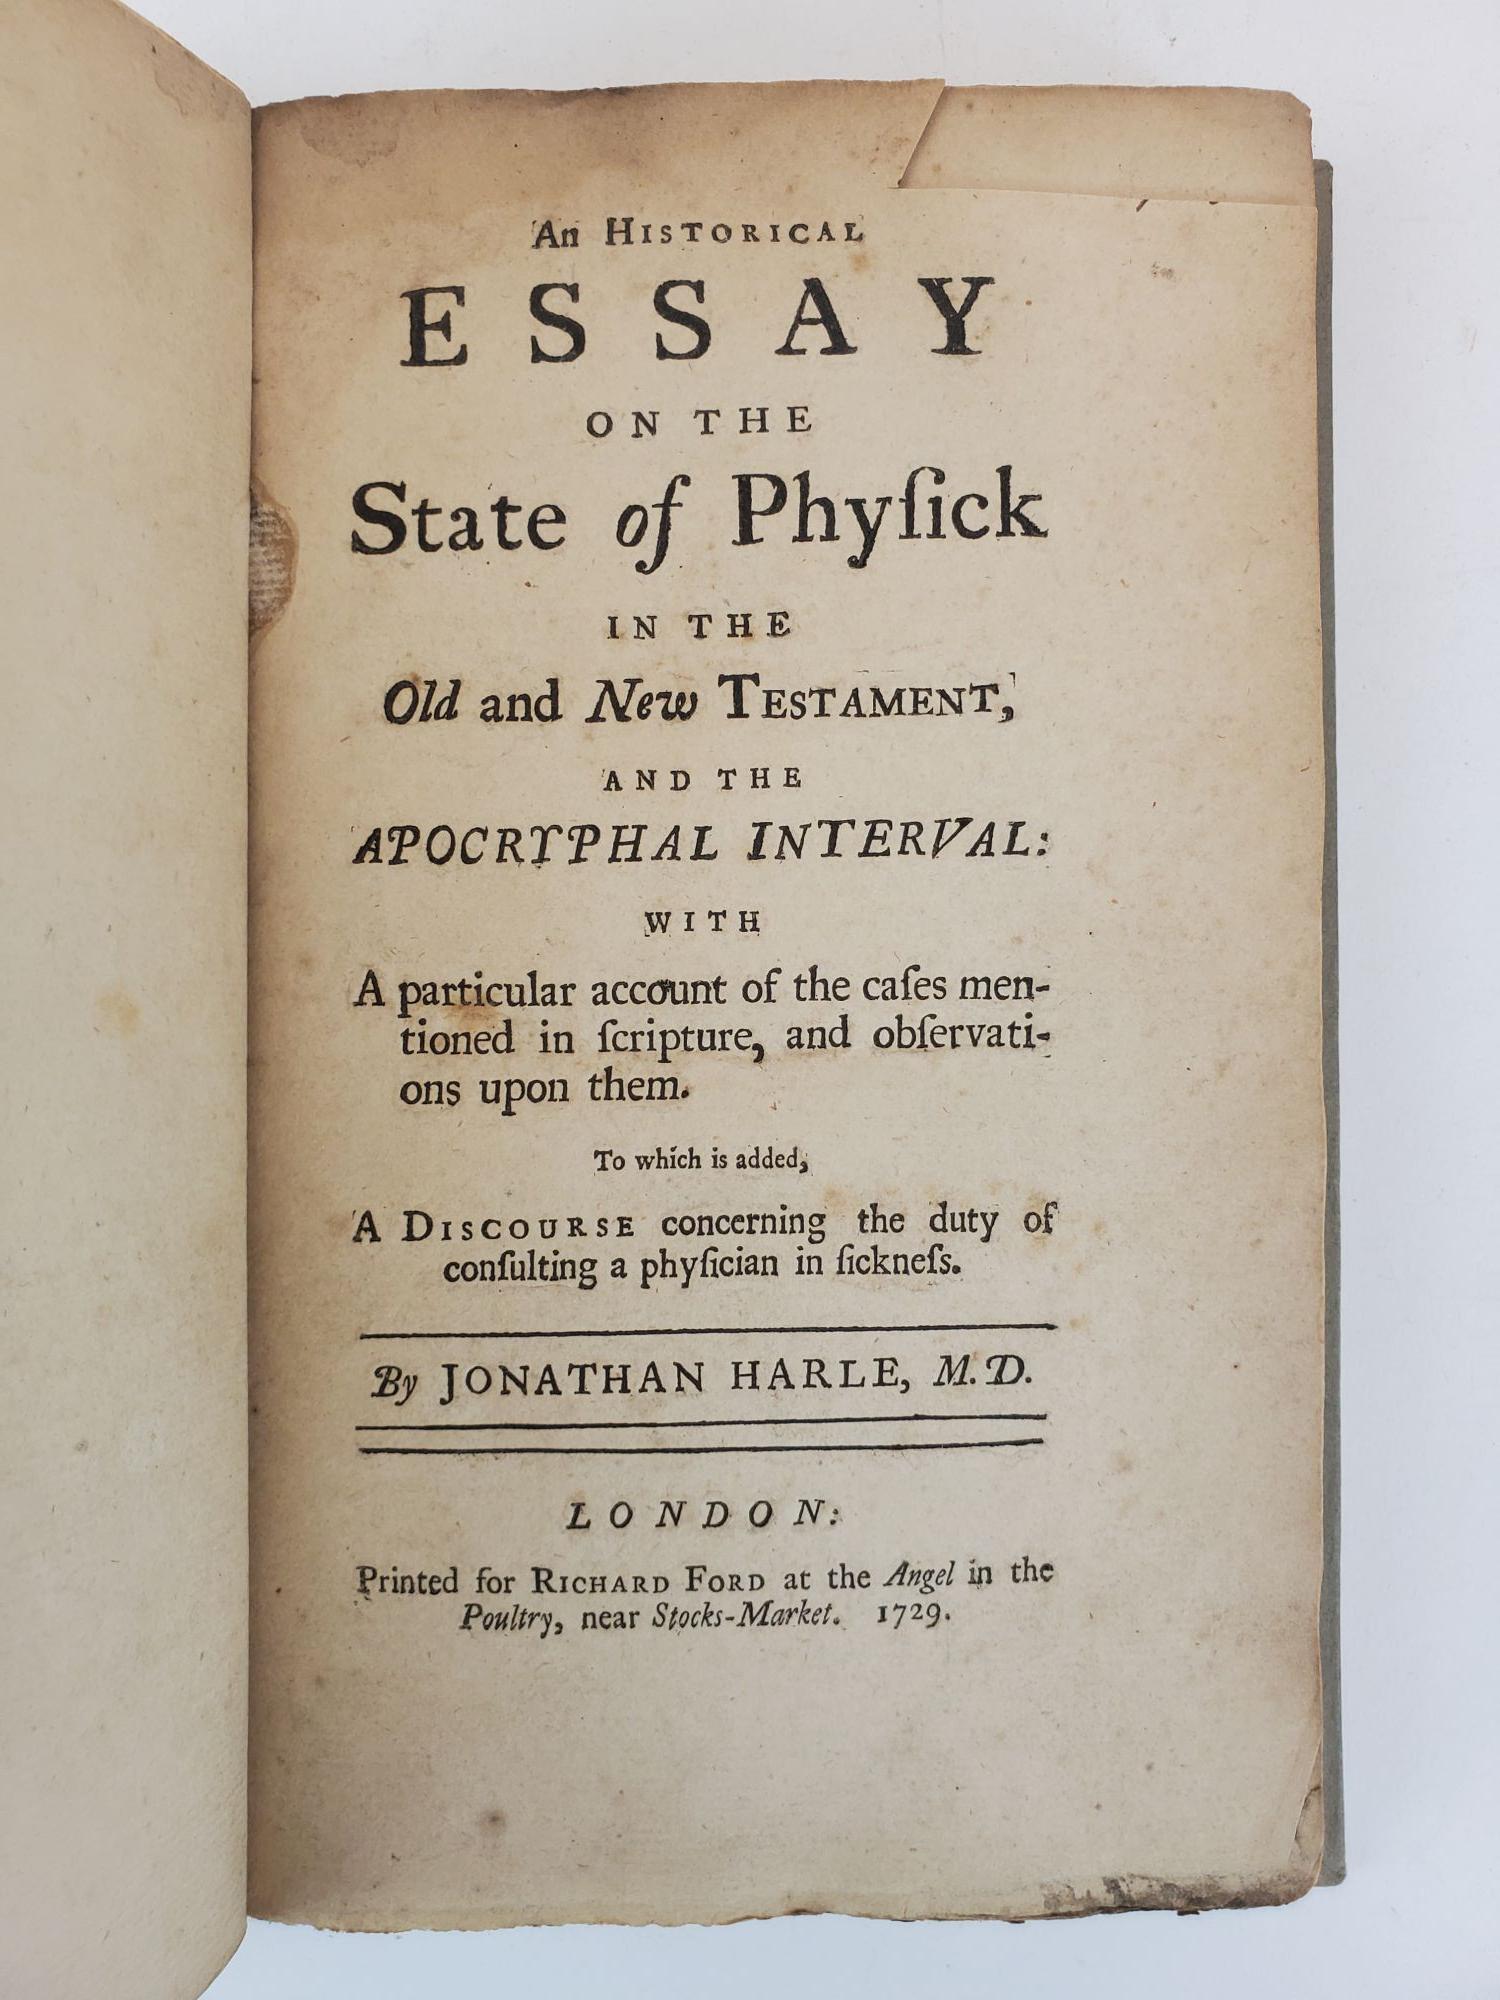 Product Image for AN HISTORICAL ESSAY ON THE STATE OF PHYSICK IN THE OLD AND NEW TESTAMENT, AND THE APOCRYPHAL INTERVAL: WITH A PARTICULAR ACCOUNT OF THE CASES MENTIONED IN SCRIPTURE, AND OBSERVATIONS UPON THEM